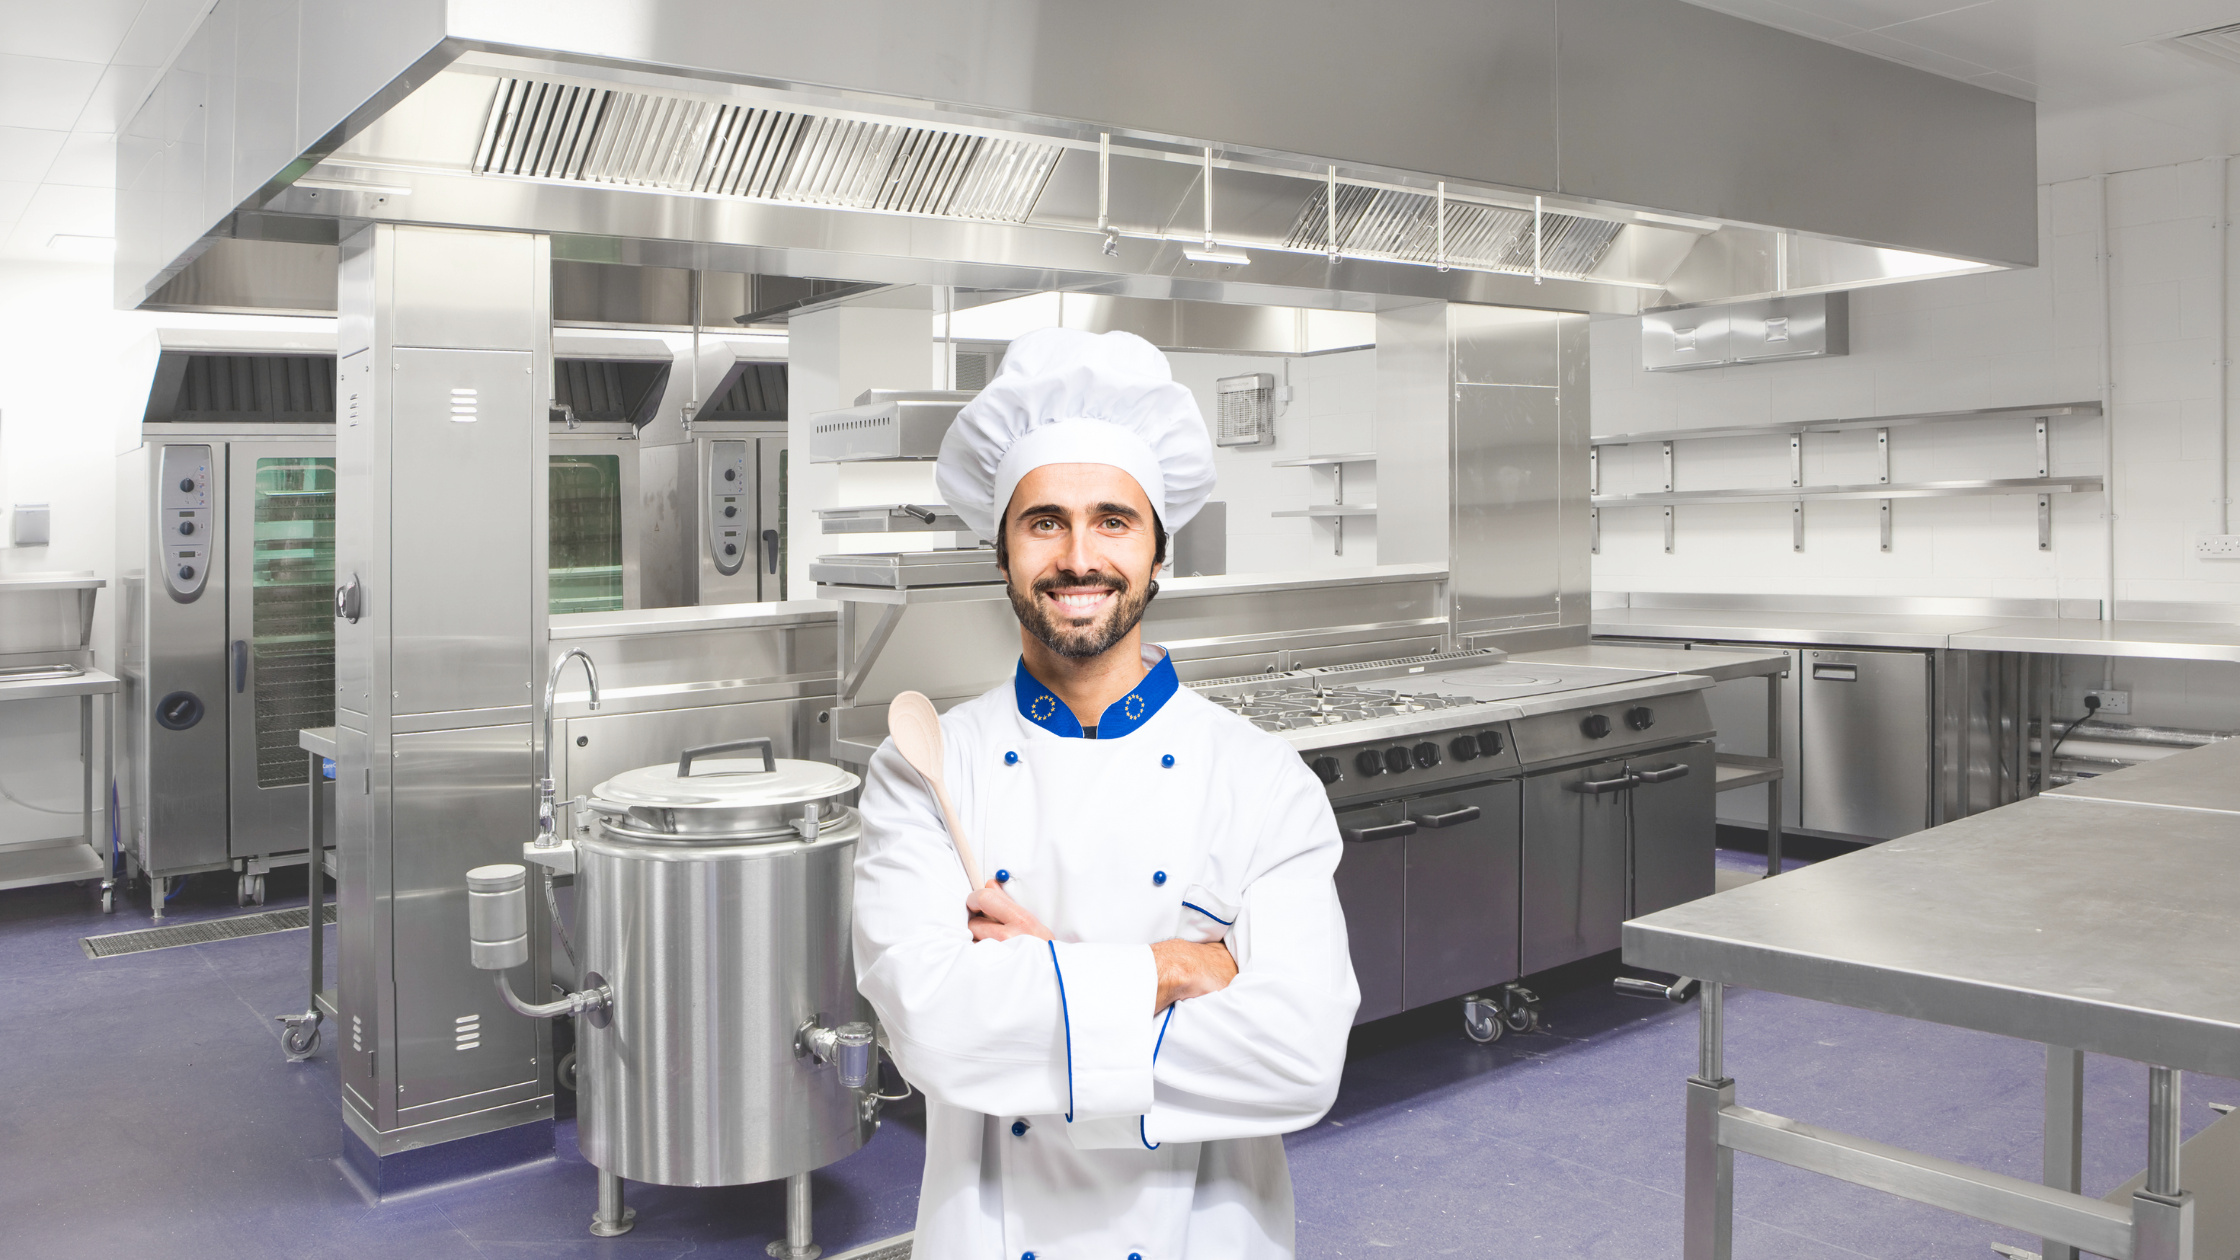 Commercial Kitchen & Catering Business Equipment 